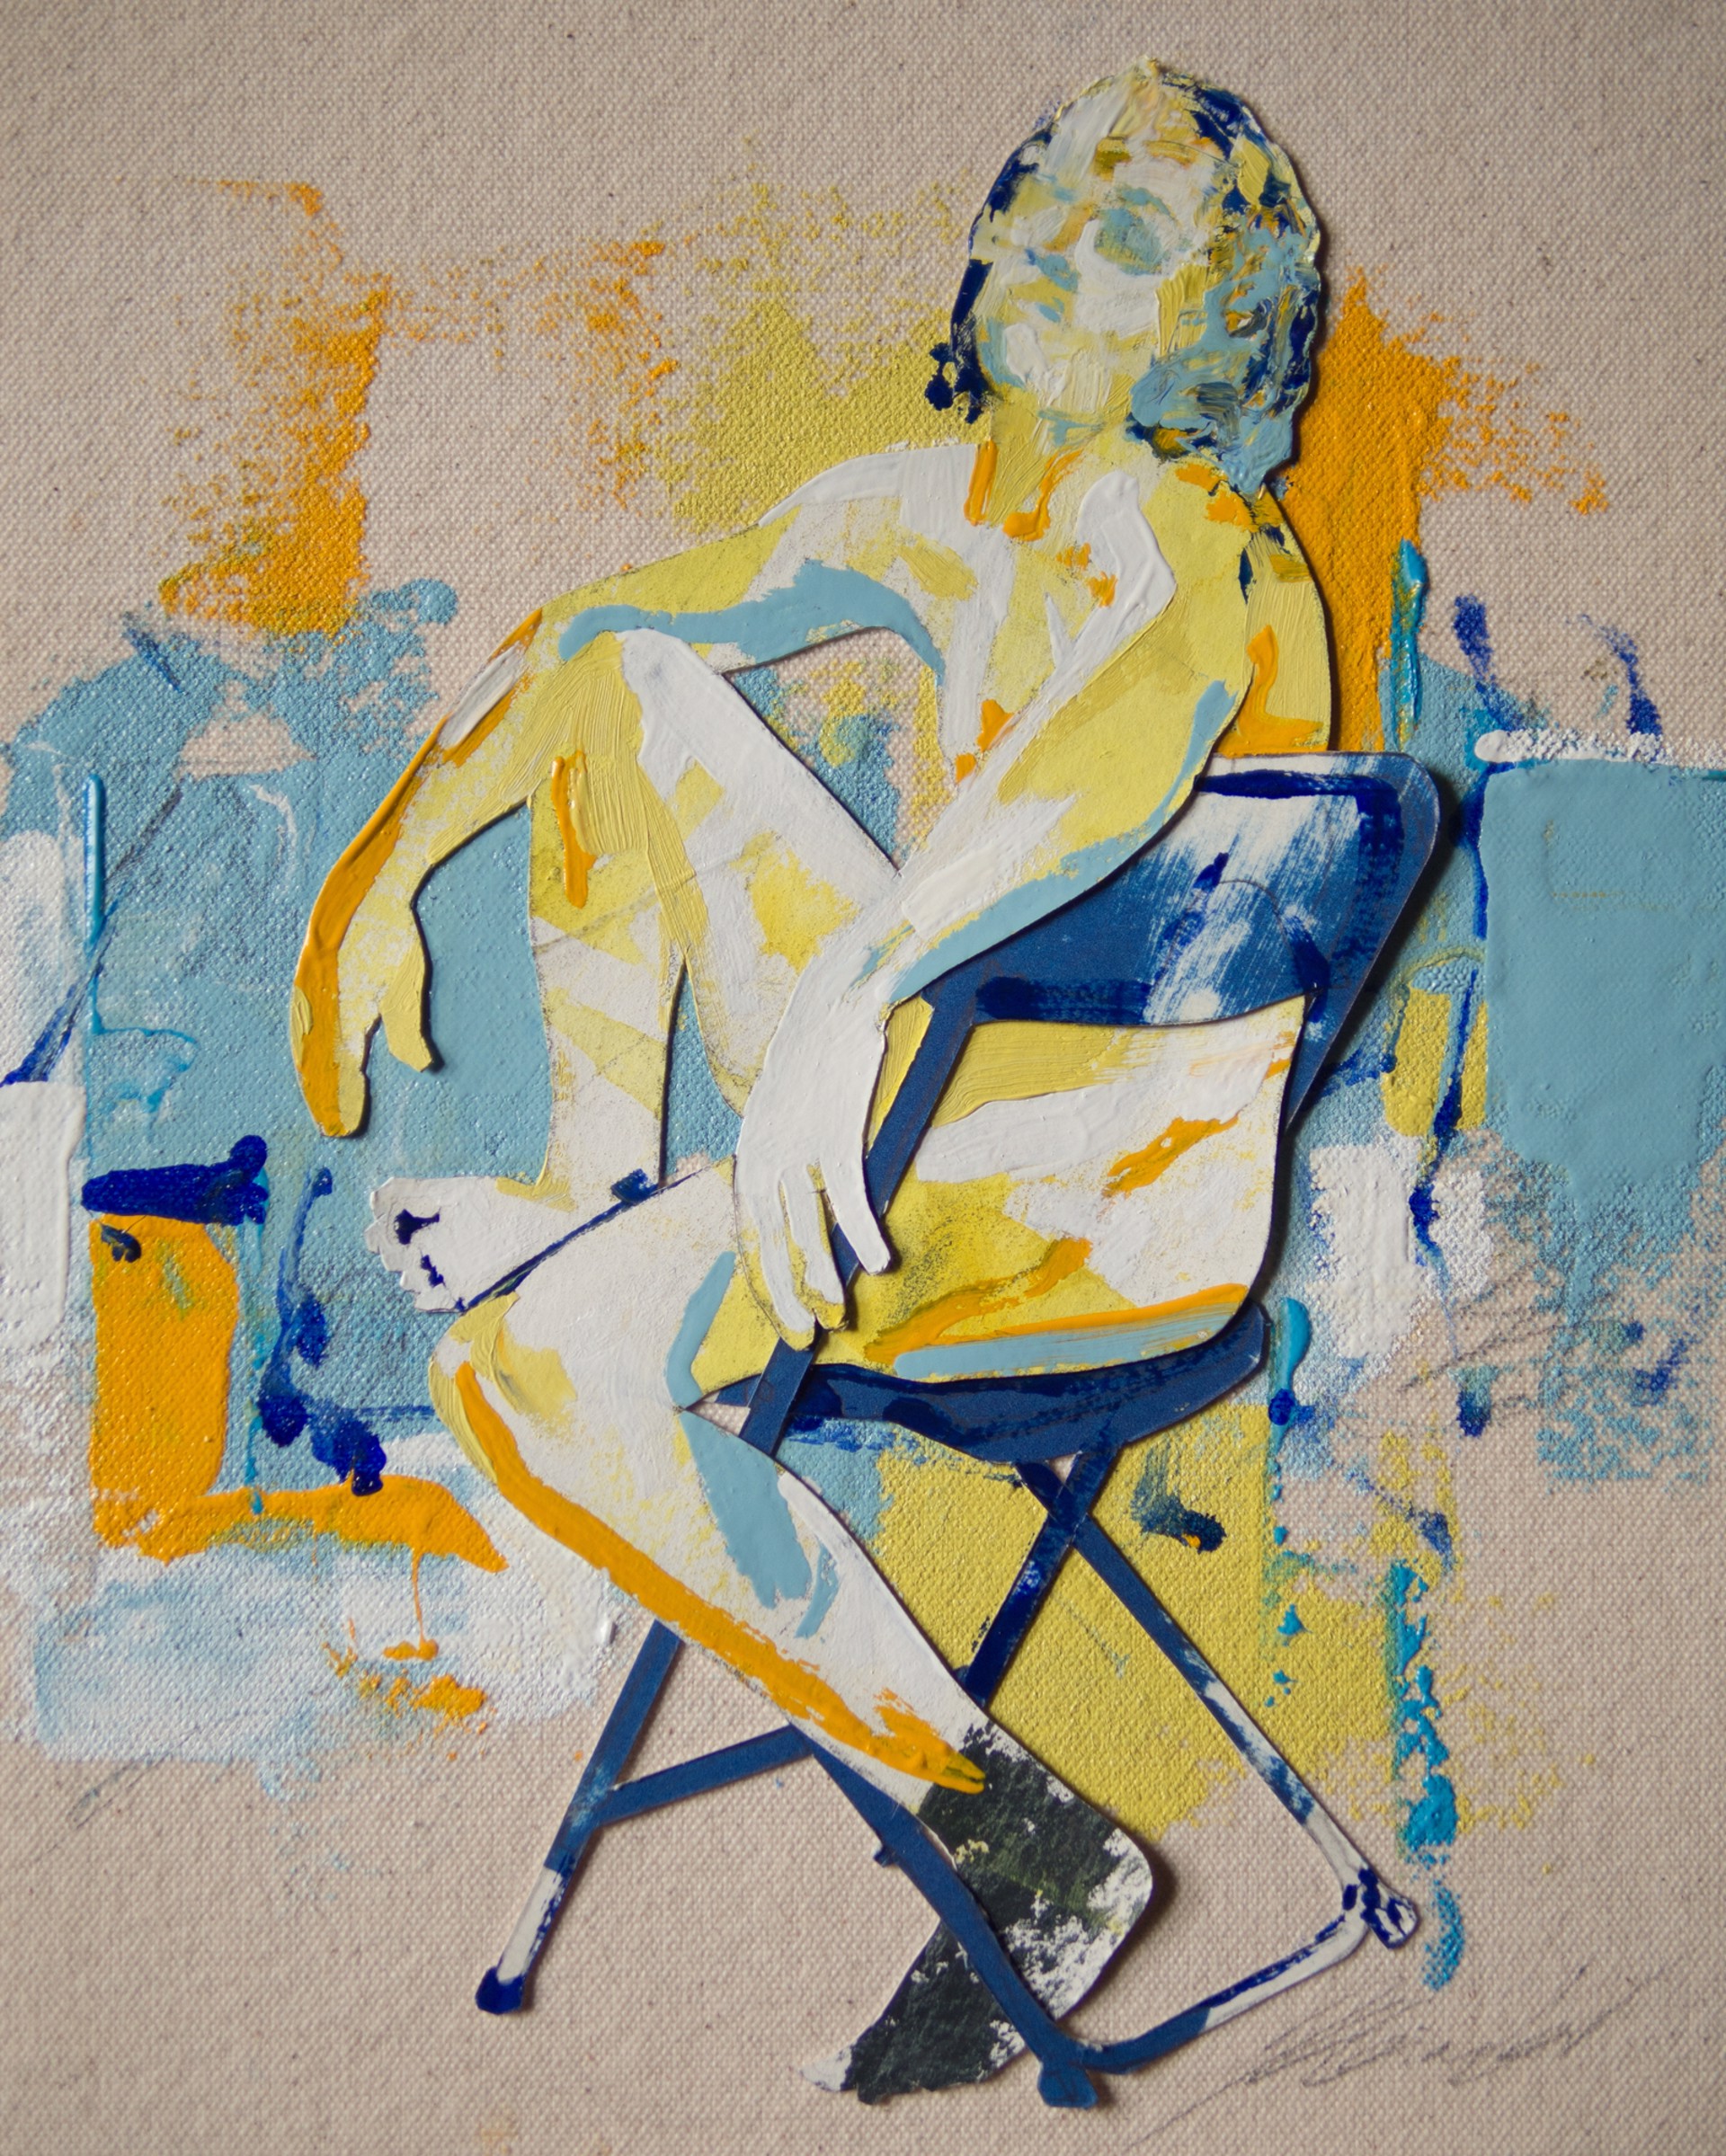 Geo and the Blue Chair by Jason Lee Gimbel